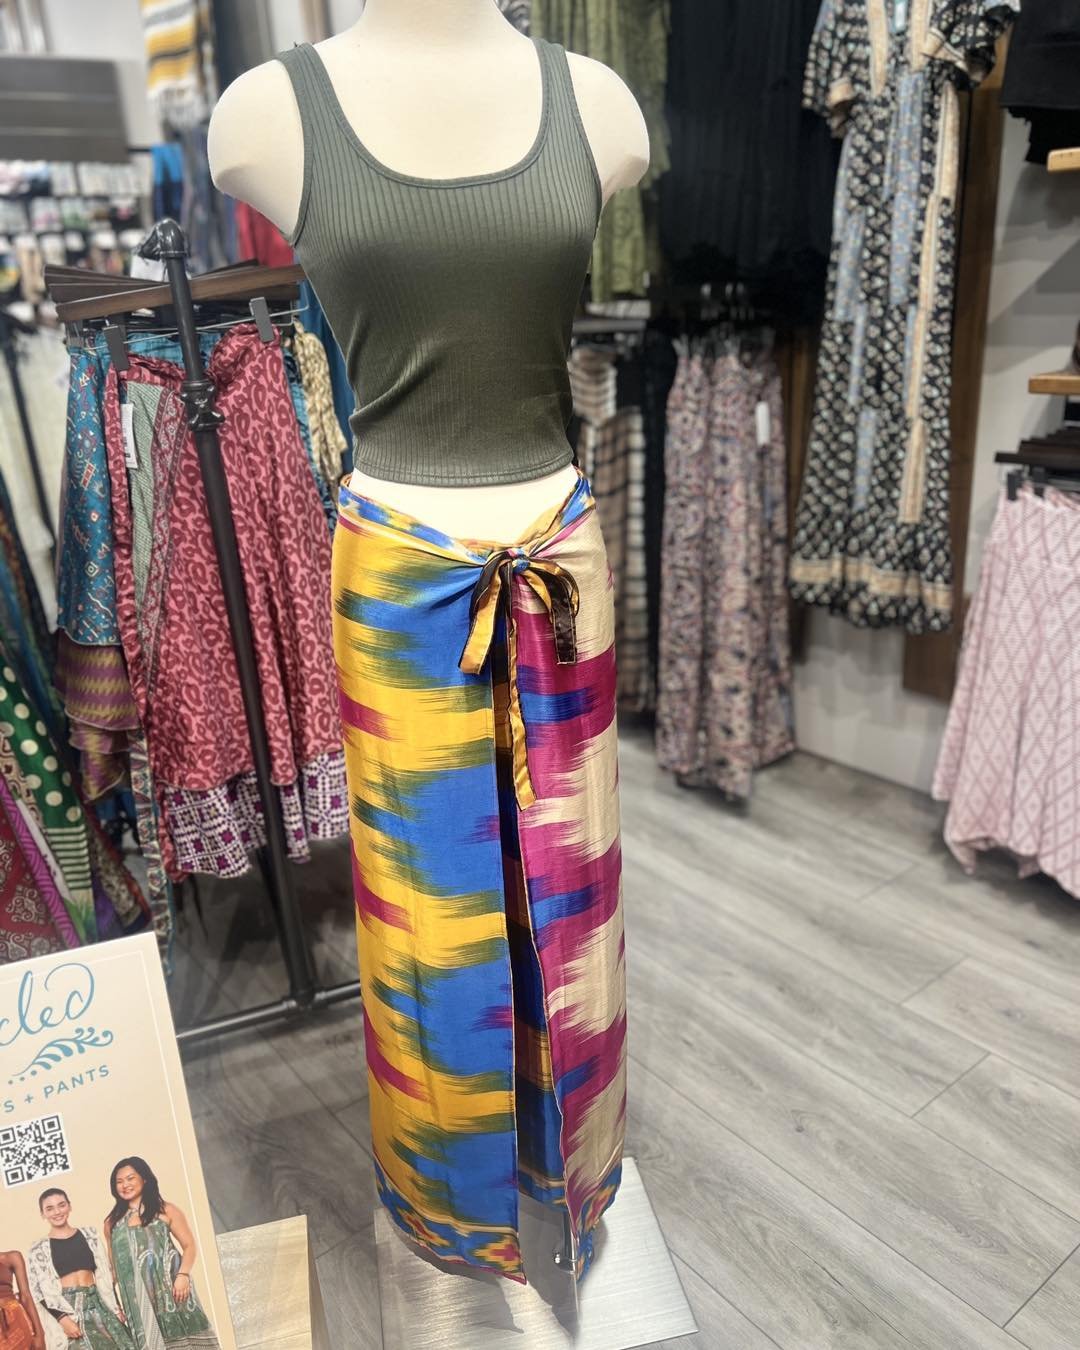 In honor of Earth Day, we invite you to check out the Upcycled Collection at Earthbound Trading Company!✌️🌎 Their super soft upcycled wrap skirt collection is created in Pushkar, India. This collection is made by re-purposing, cleaning and stitching